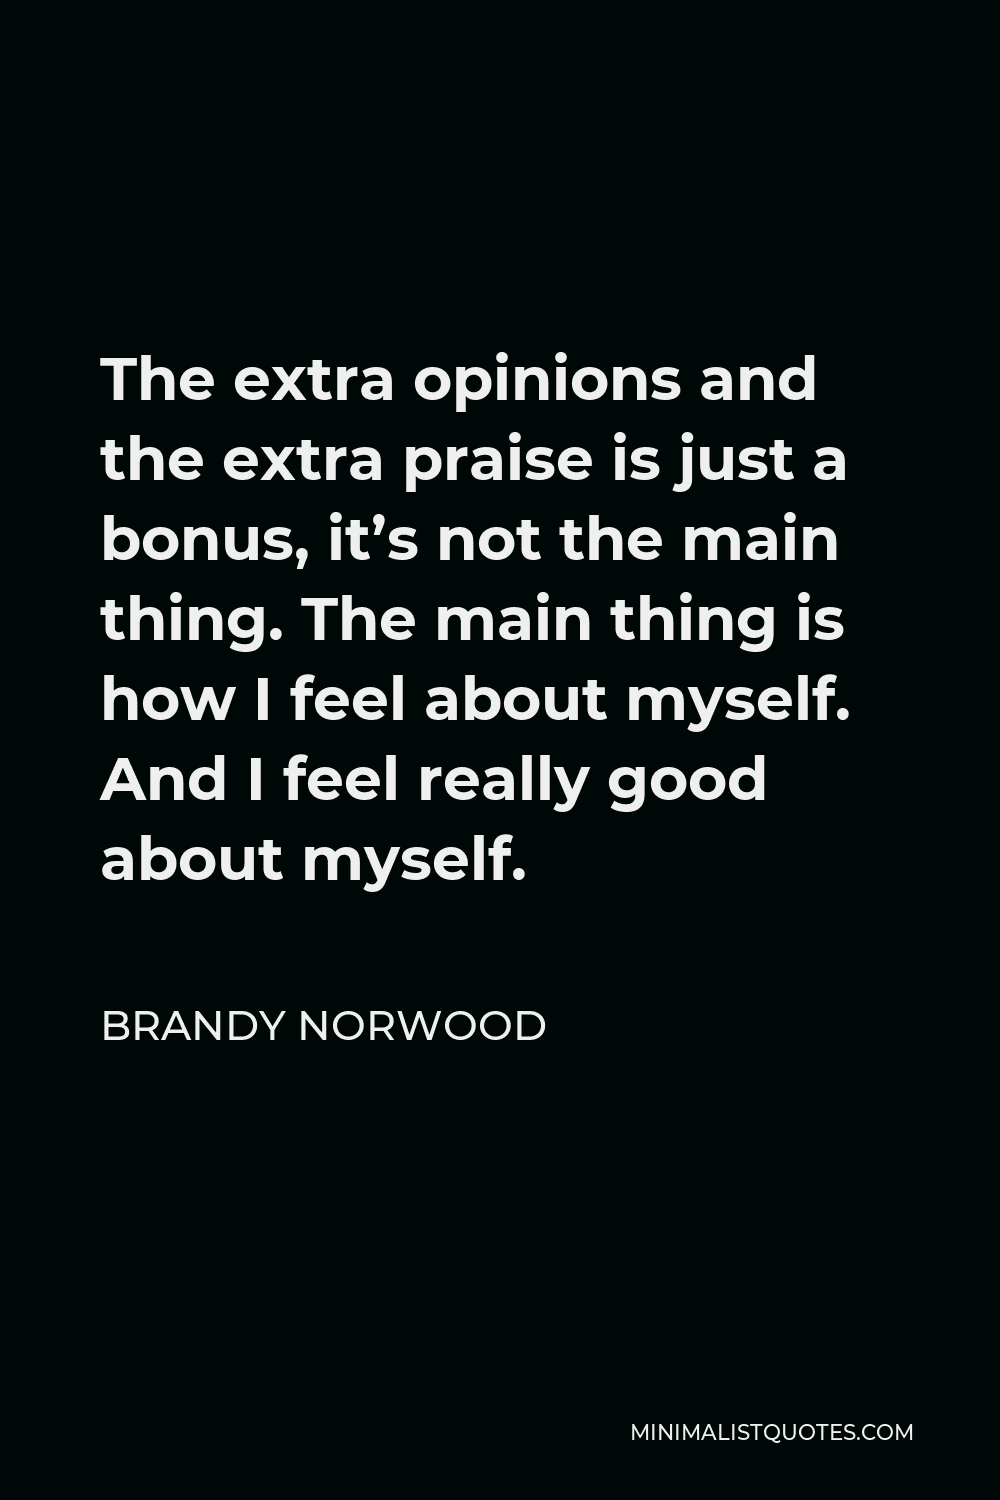 Brandy Norwood Quote - The extra opinions and the extra praise is just a bonus, it’s not the main thing. The main thing is how I feel about myself. And I feel really good about myself.